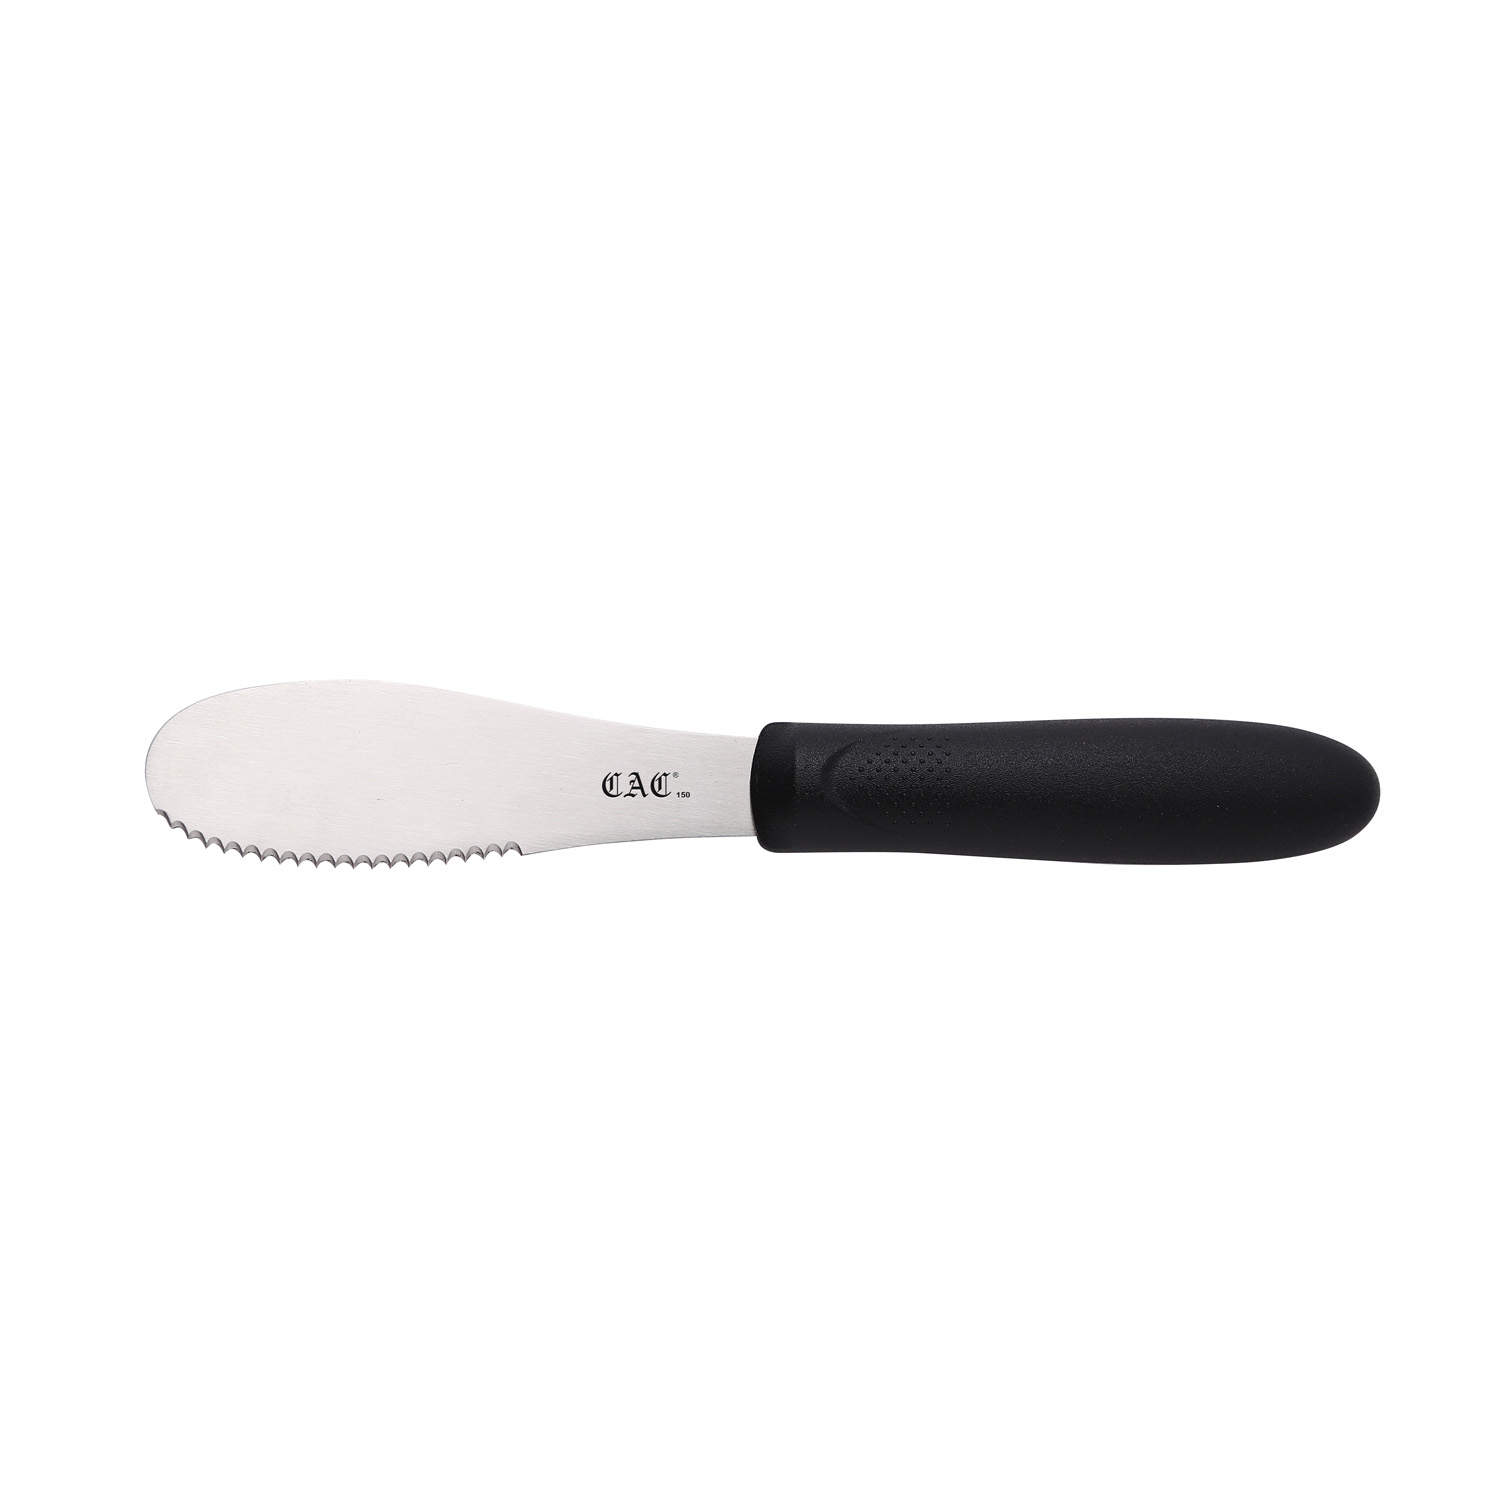 CAC China SPSP-4BK Black Serrated Spreader with Plastic Handle 3-7/8"